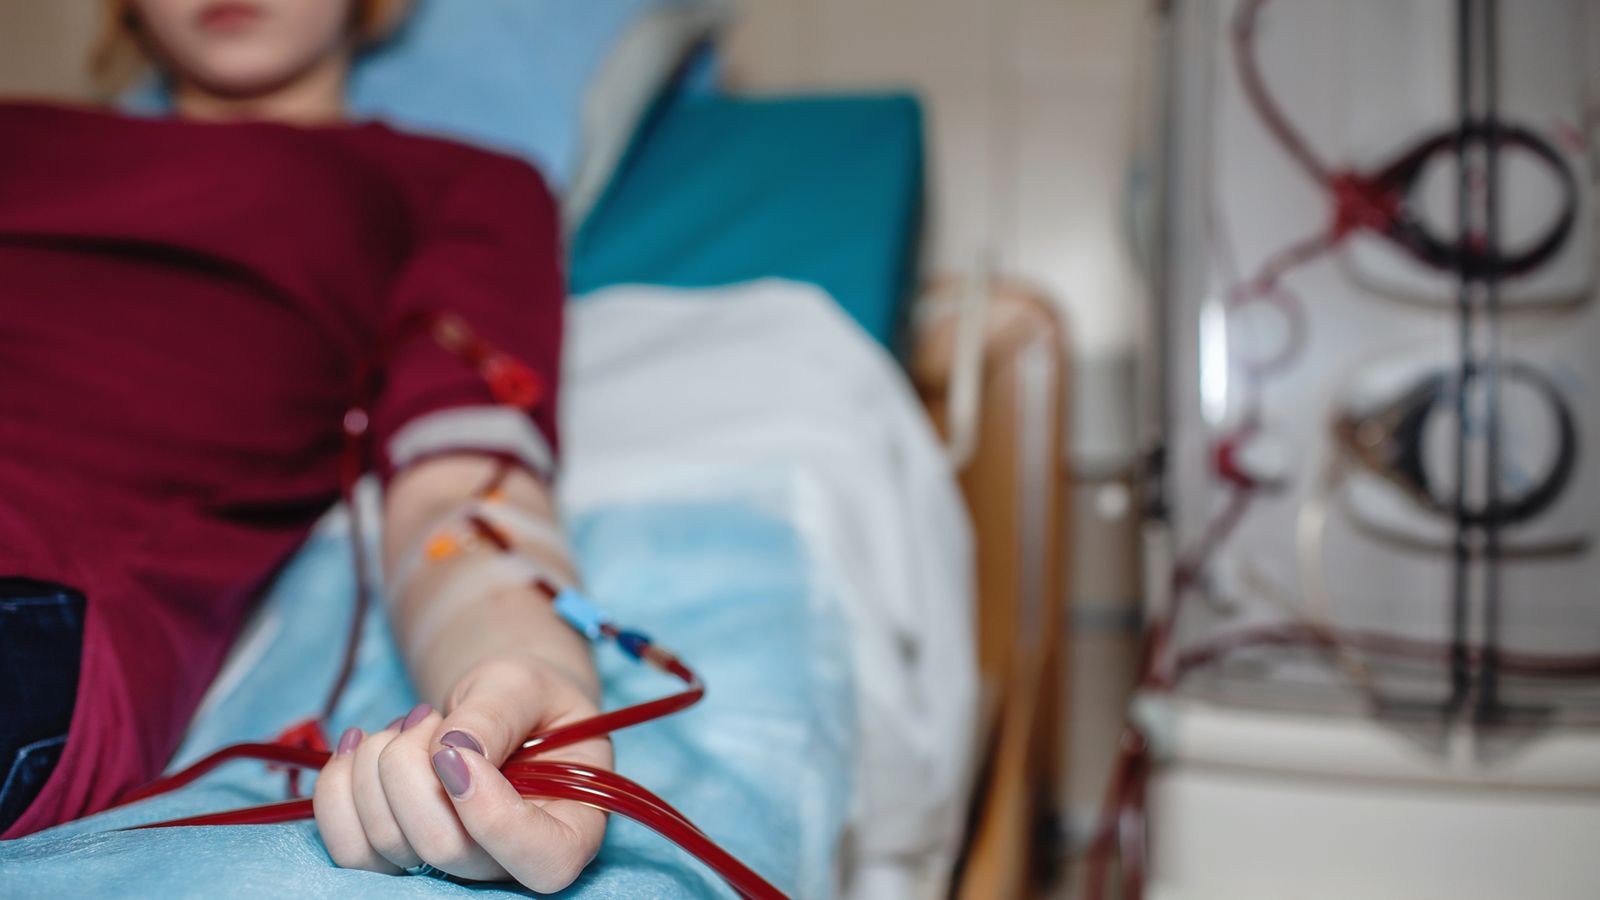 kidney disease 'could become public health emergency'